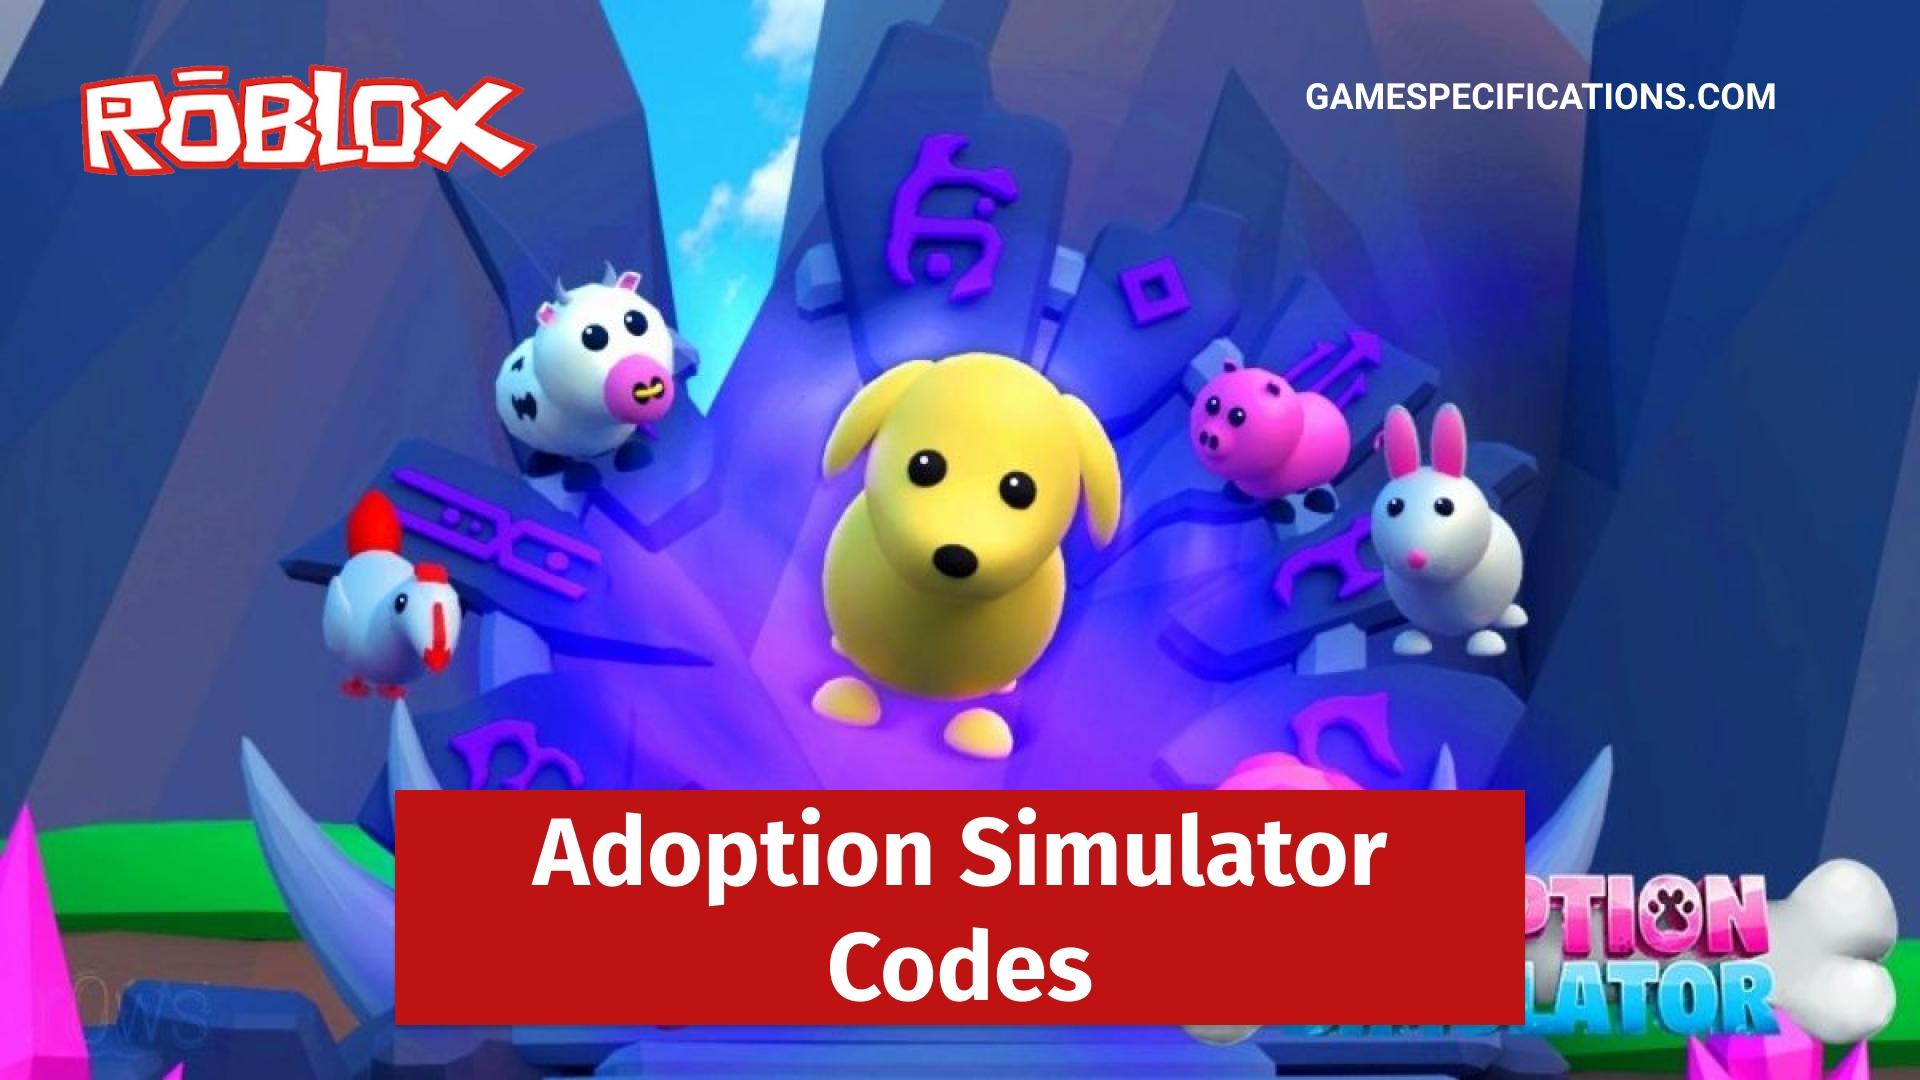 roblox-adoption-simulator-codes-september-2023-game-specifications